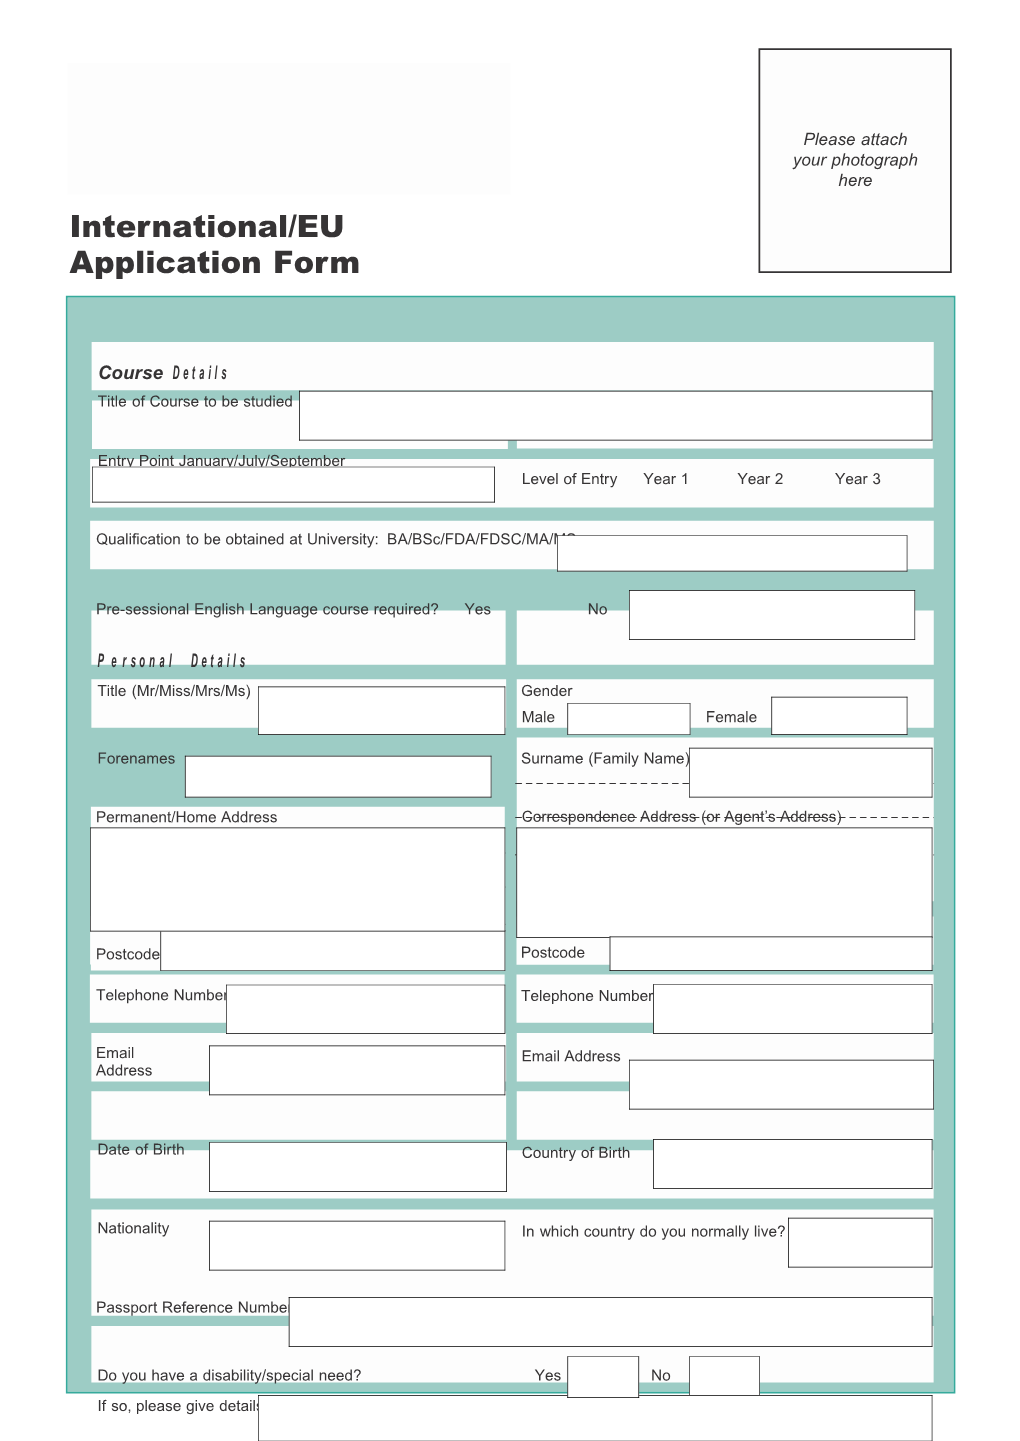 Intl.Application.Form.New:Layout 1